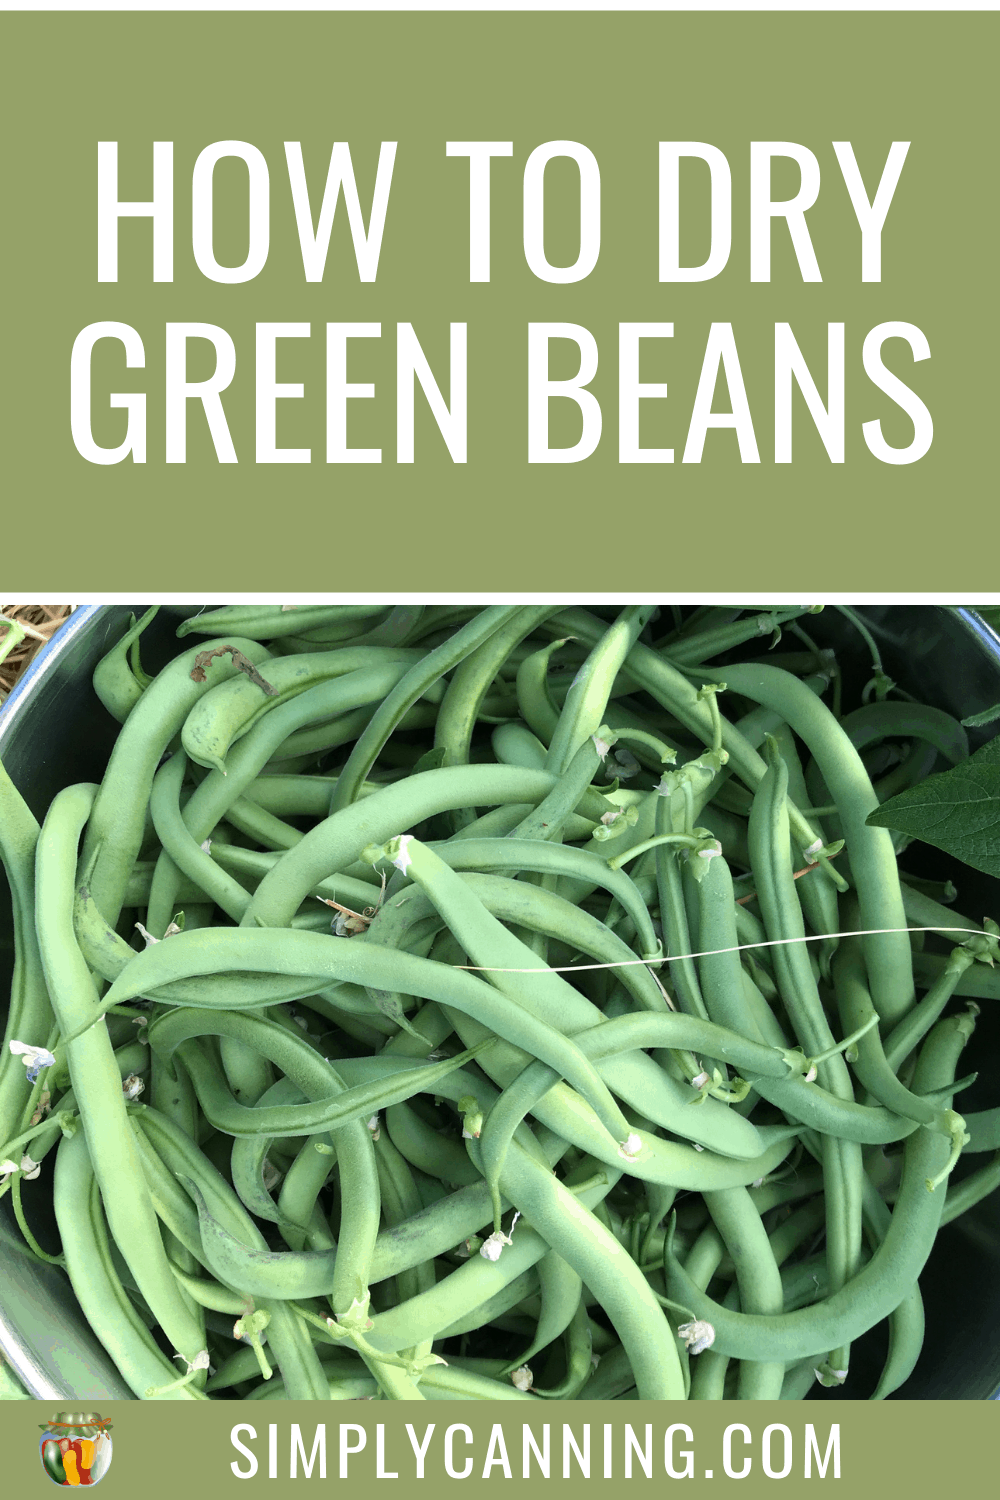 Dehydrating Green Beans: How to Dry Green Beans for Storage